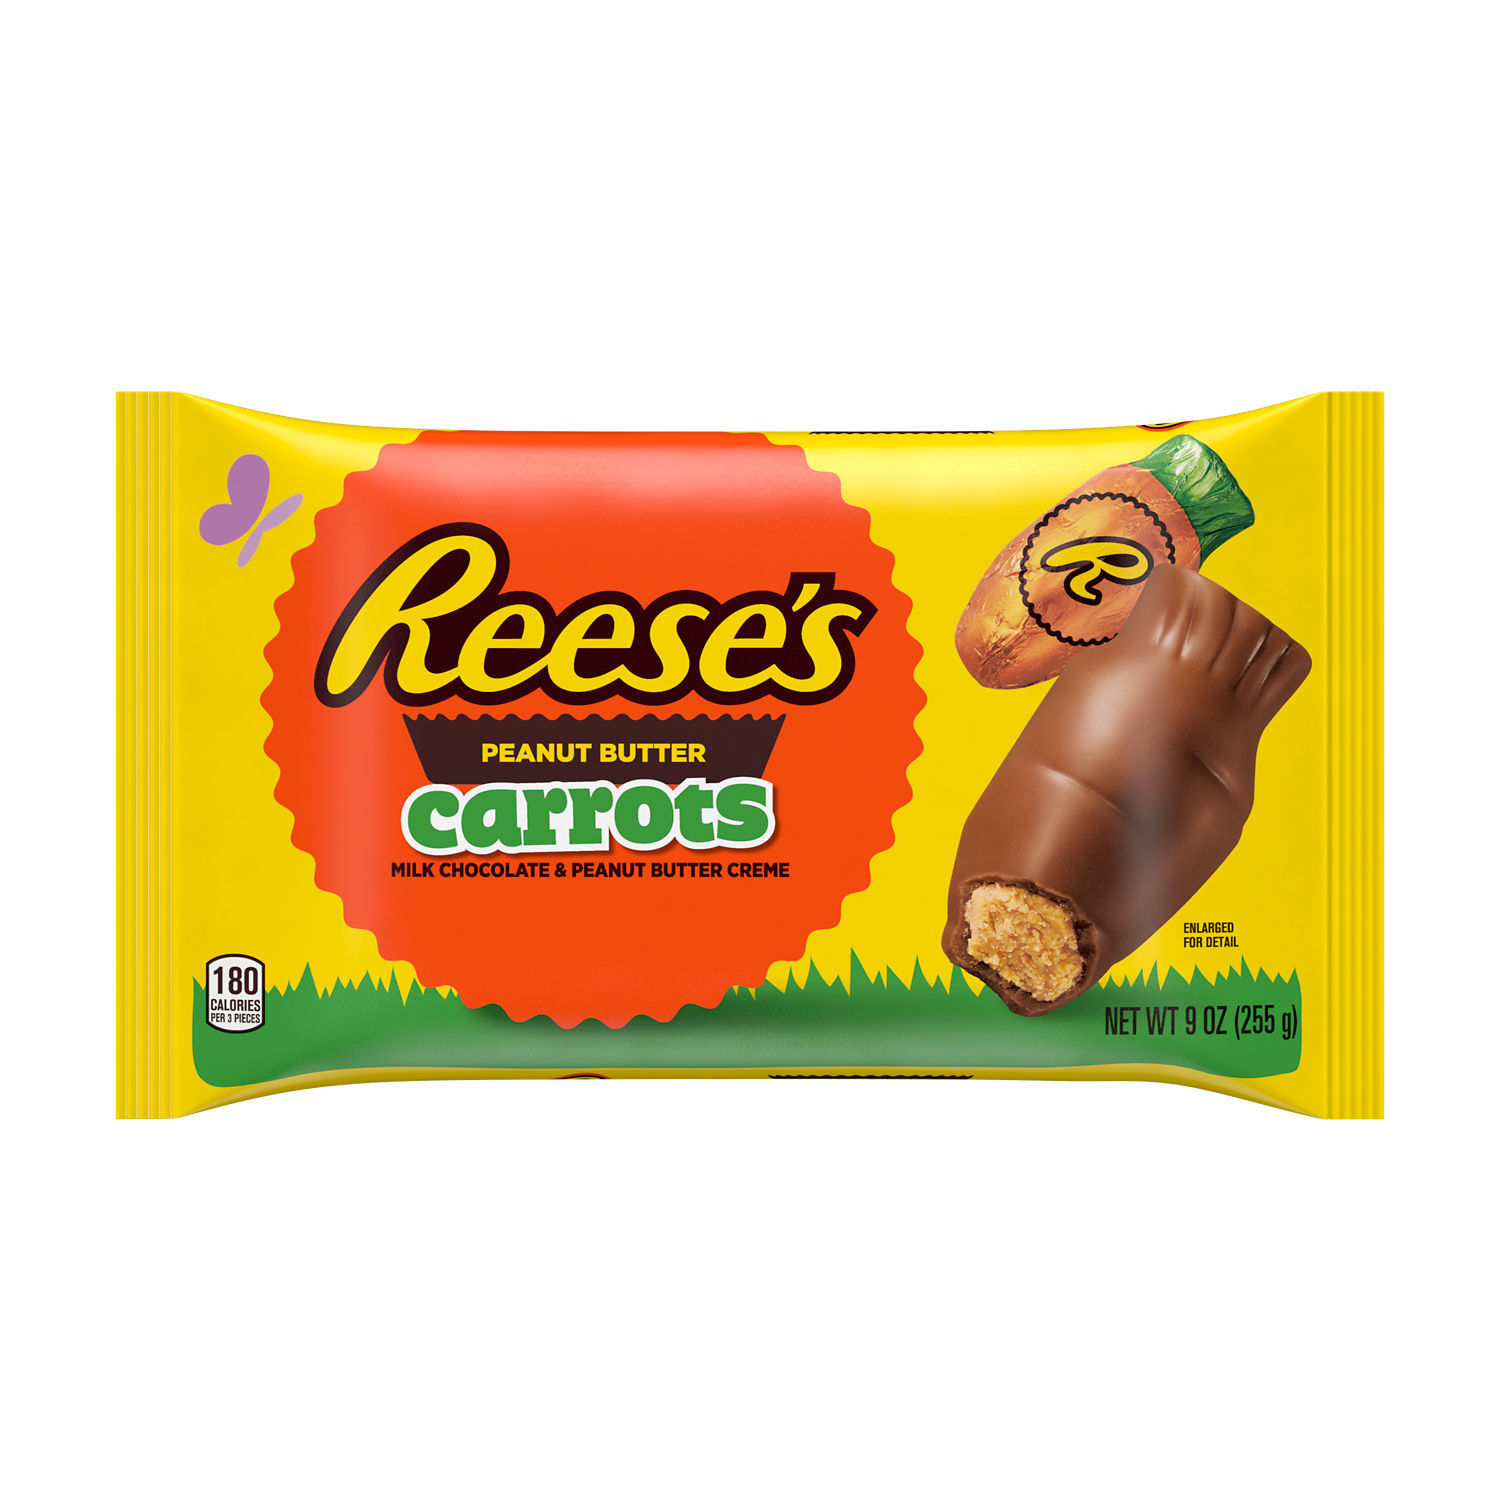 Reese's Milk Chocolate Peanut Butter Creme Carrots Easter Candy, Bag 9 oz - image 1 of 8